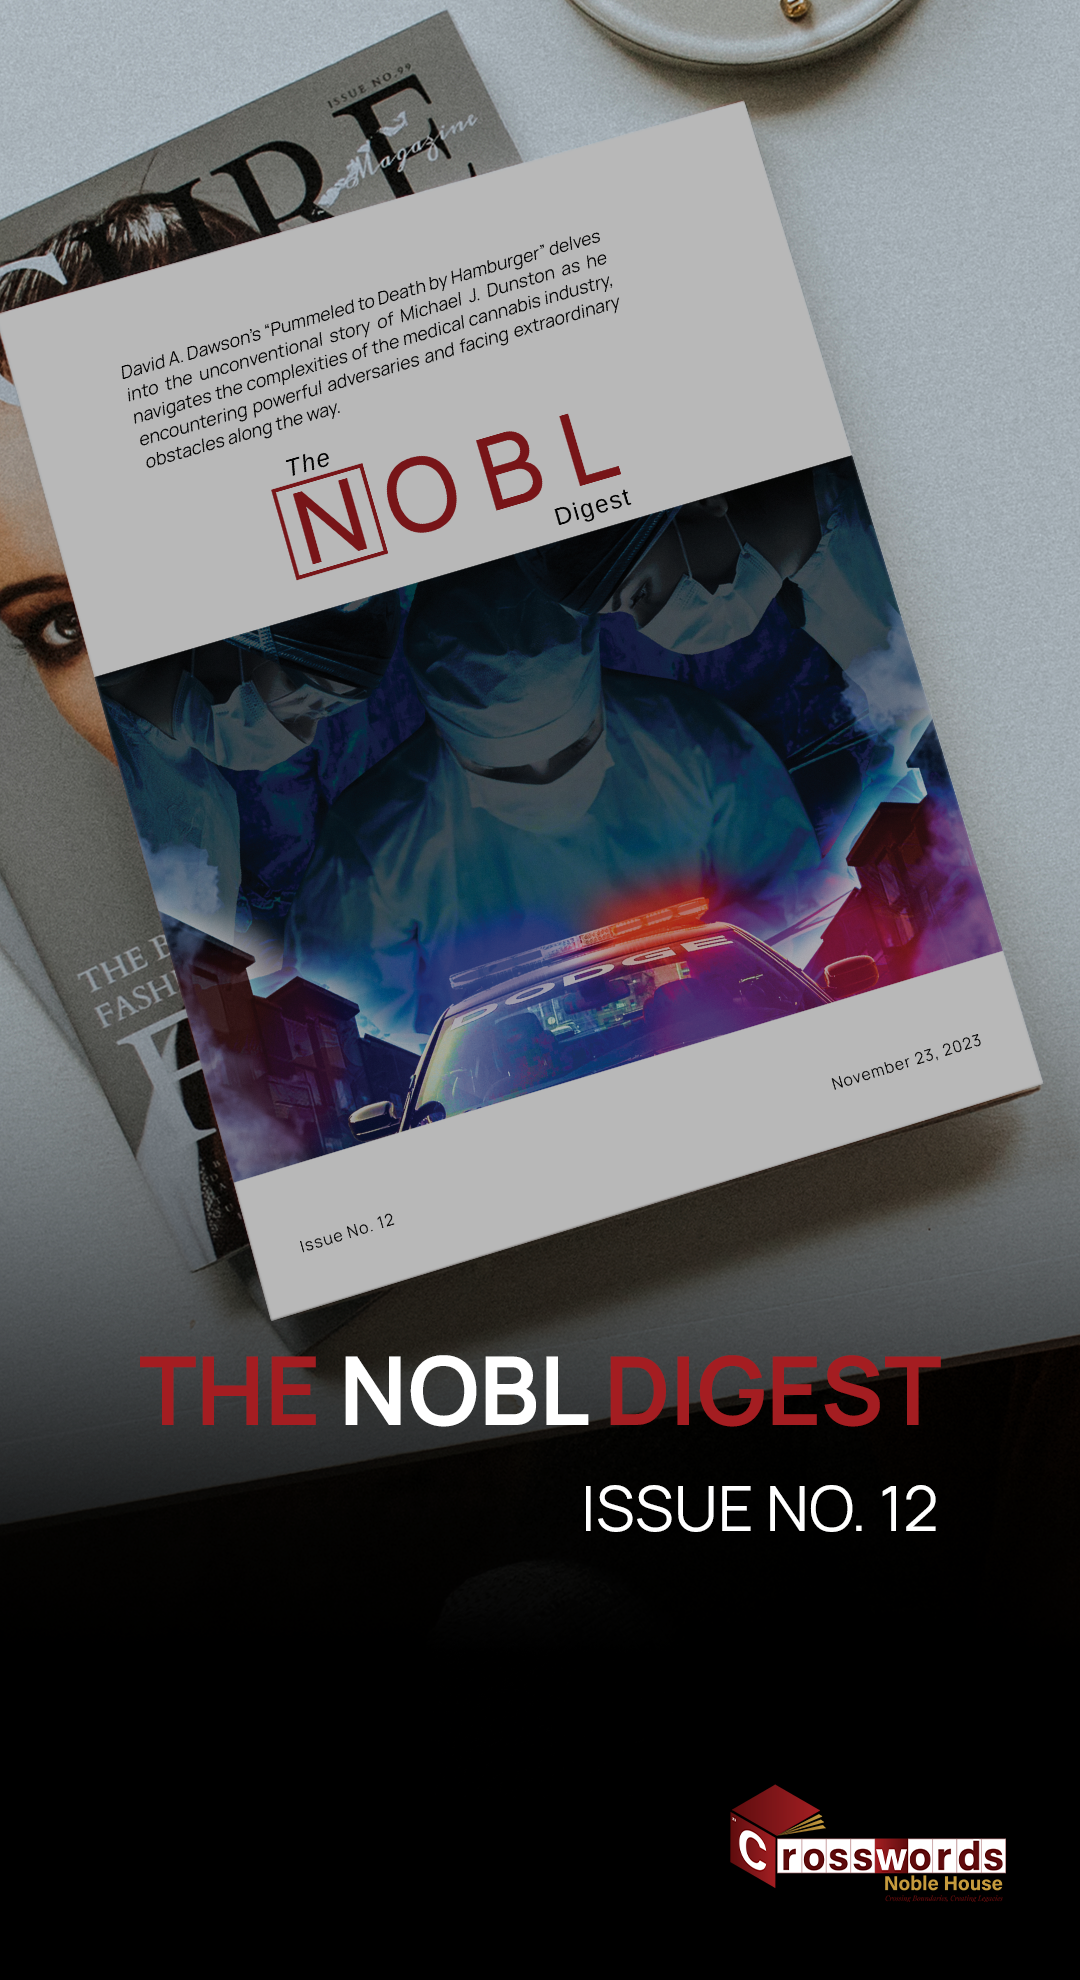 NOBL Digest Issue No. 12 – Pummeled to Death by Hamburger: The Tale of a Man’s Lifetime on the Fringes of the Medical Cannabis Industry